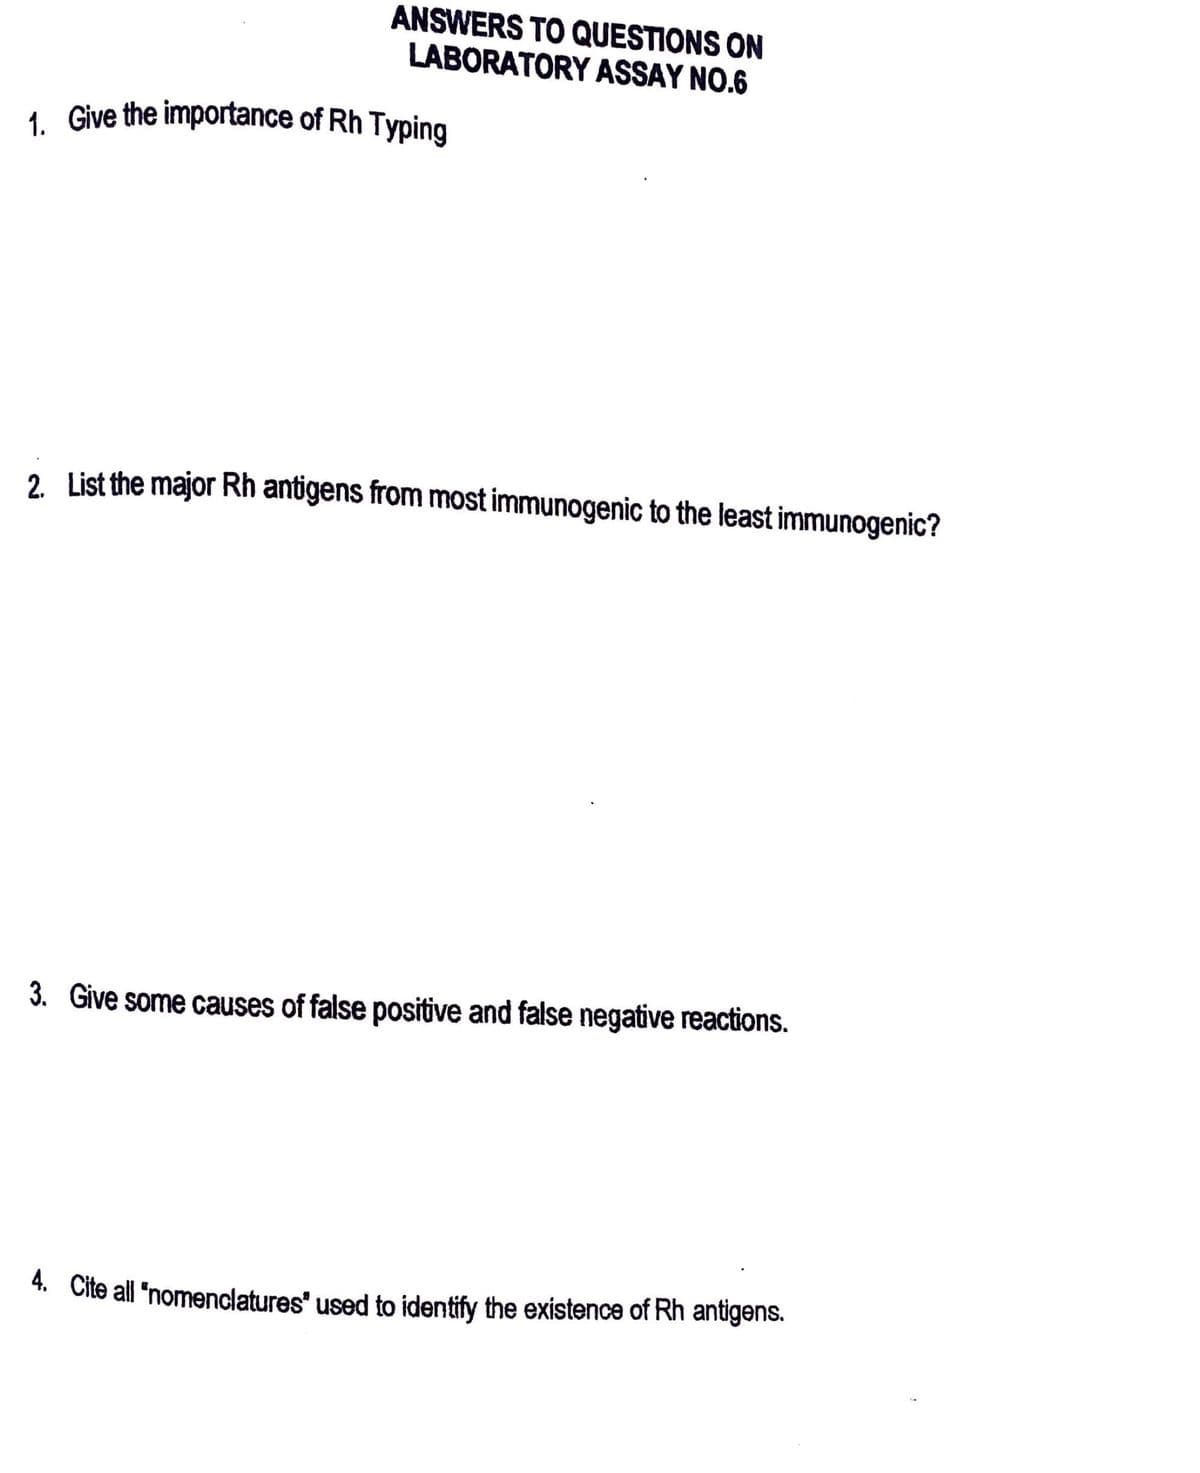 ANSWERS TO QUESTIONS ON
LABORATORY ASSAY NO.6
1. Give the importance of Rh Typing
2. List the major Rh antigens from most immunogenic to the least immunogenic?
3. Give some causes of false positive and false negative reactions.
4. Cite all "nomenclatures" used to identify the existence of Rh antigens.